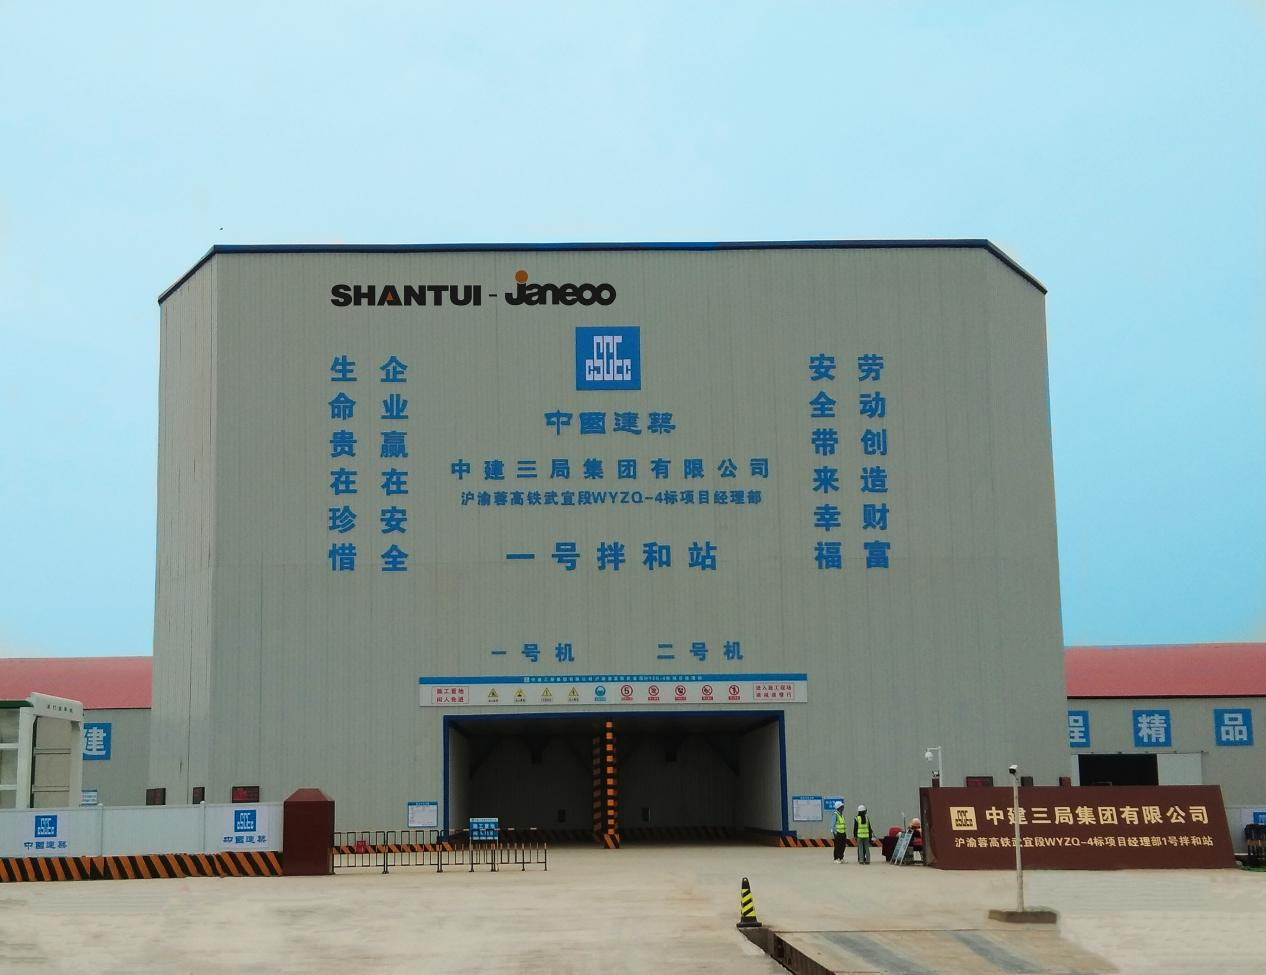 Shantui Janeoo products are used in the construction of the Shanghai-Chongqing-Chengdu high-speed railway project